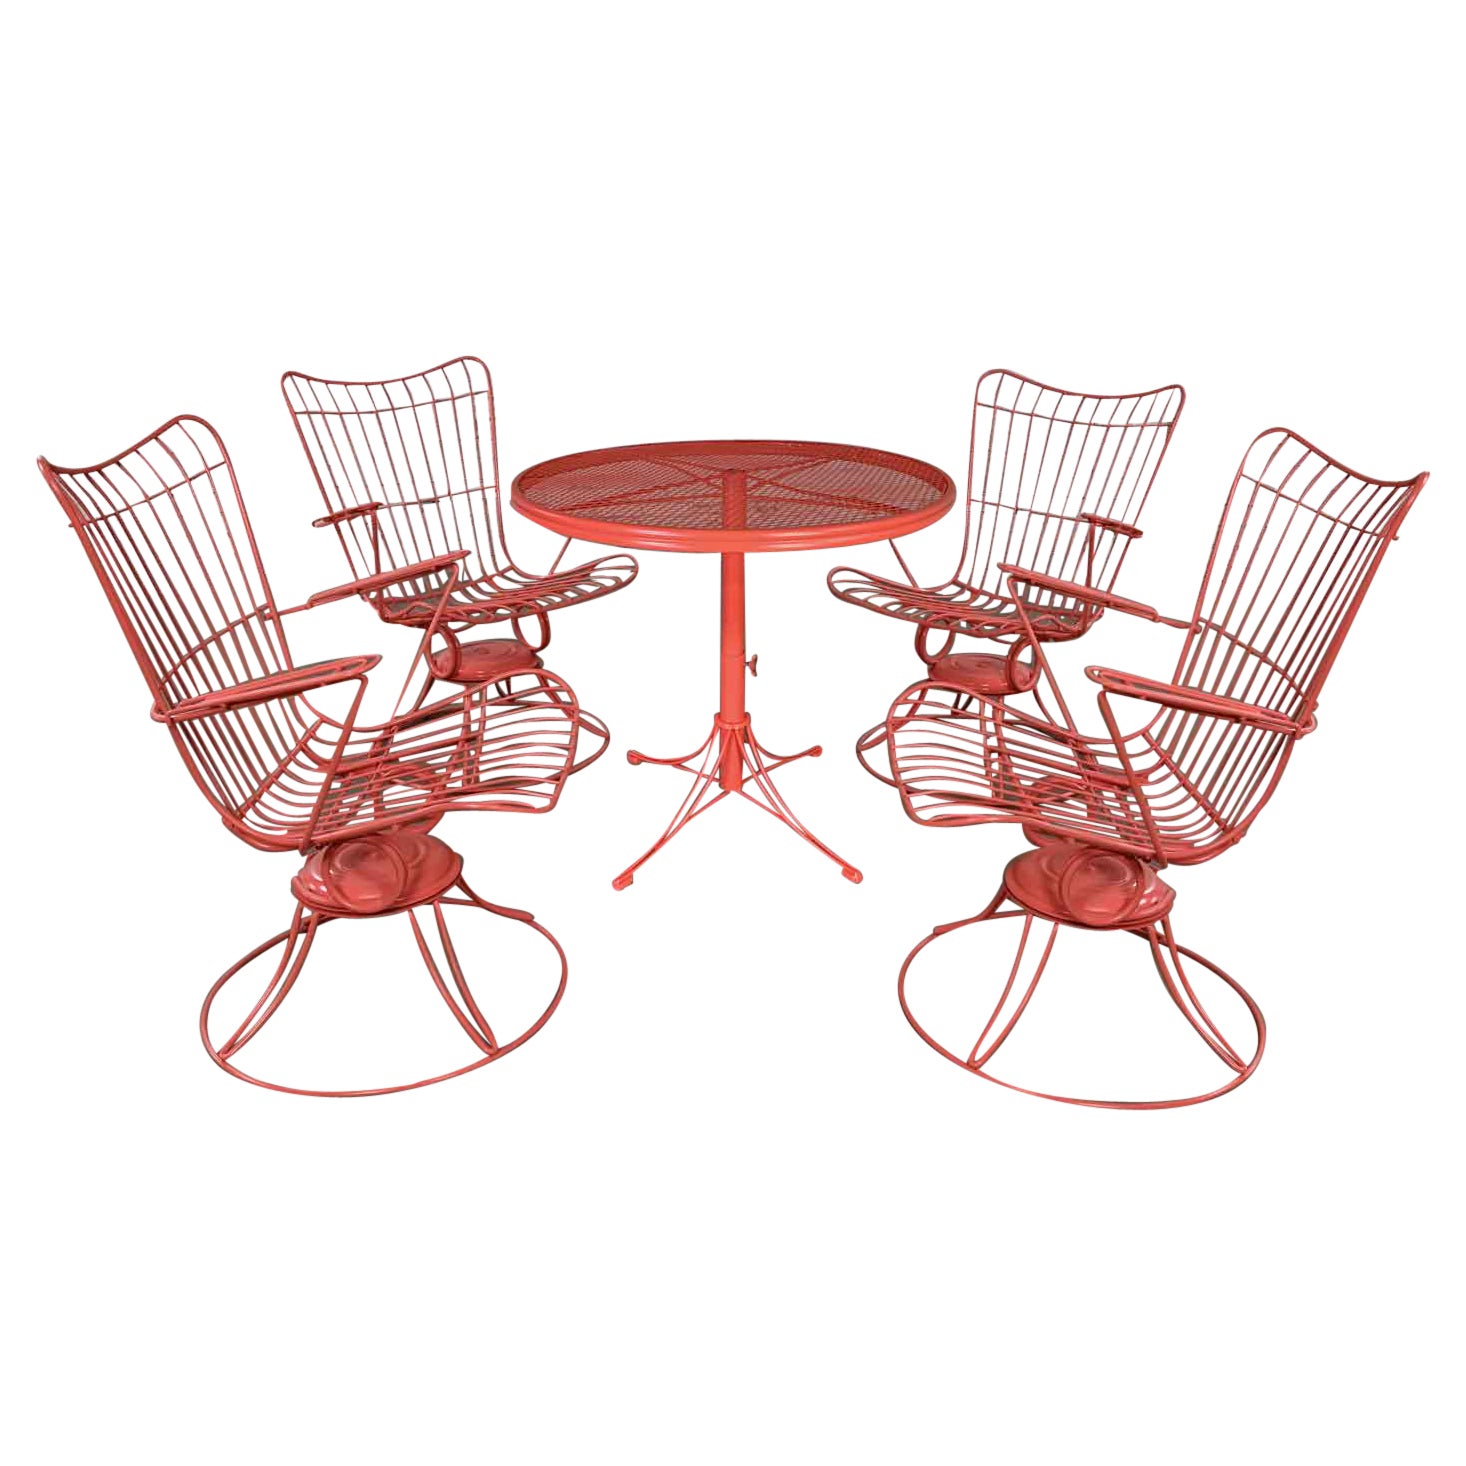 MCM Homecrest Outdoor Coral Adjustable Dining or Low Table & 4 Springer Chairs